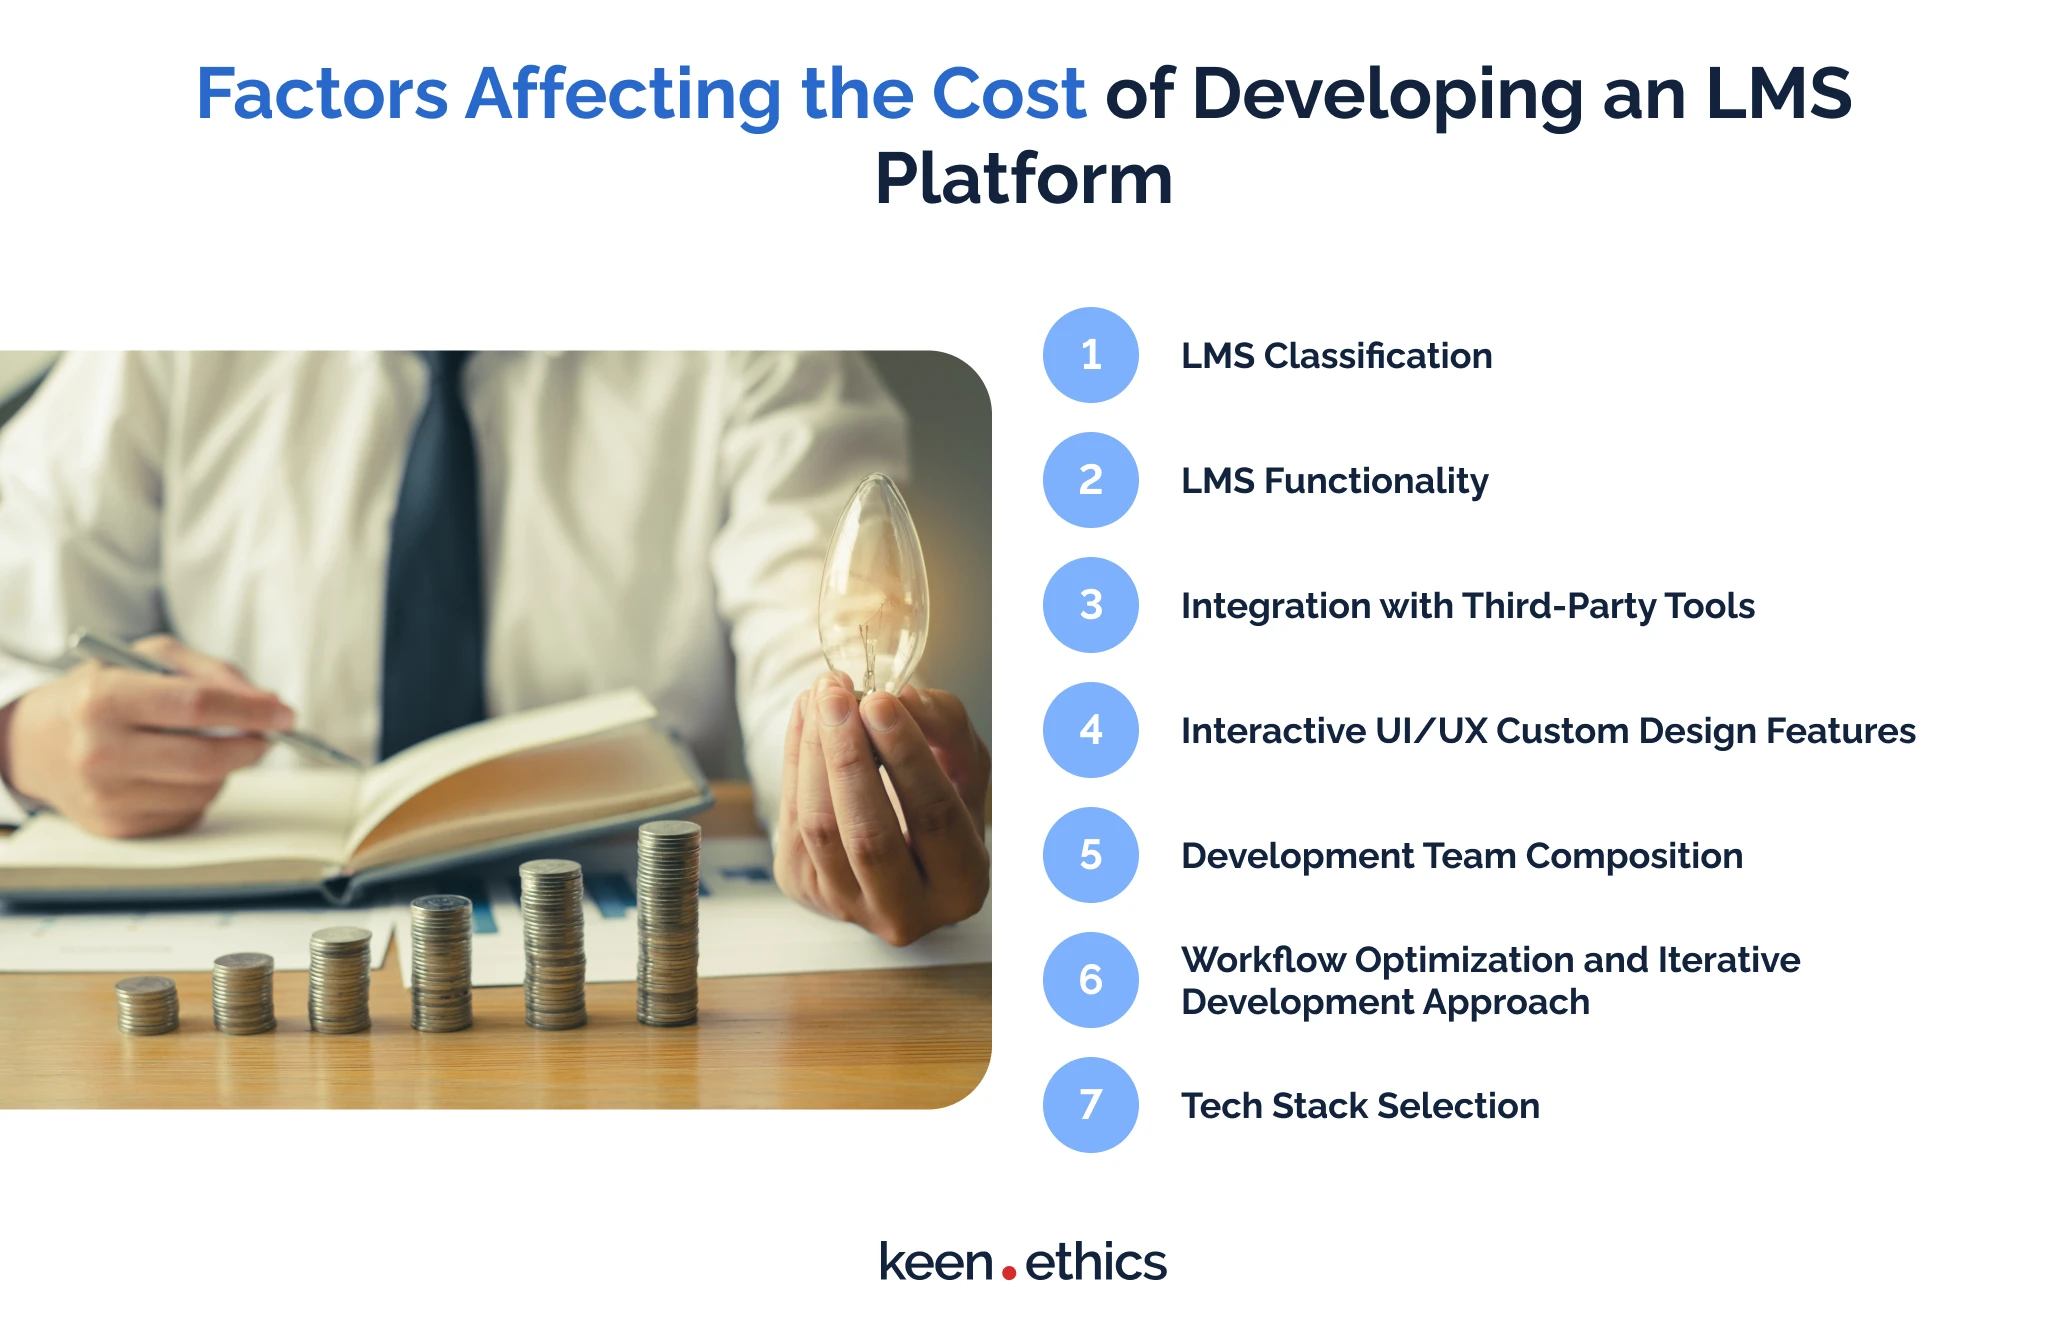 Factors Affecting the Cost of Developing an LMS Platform